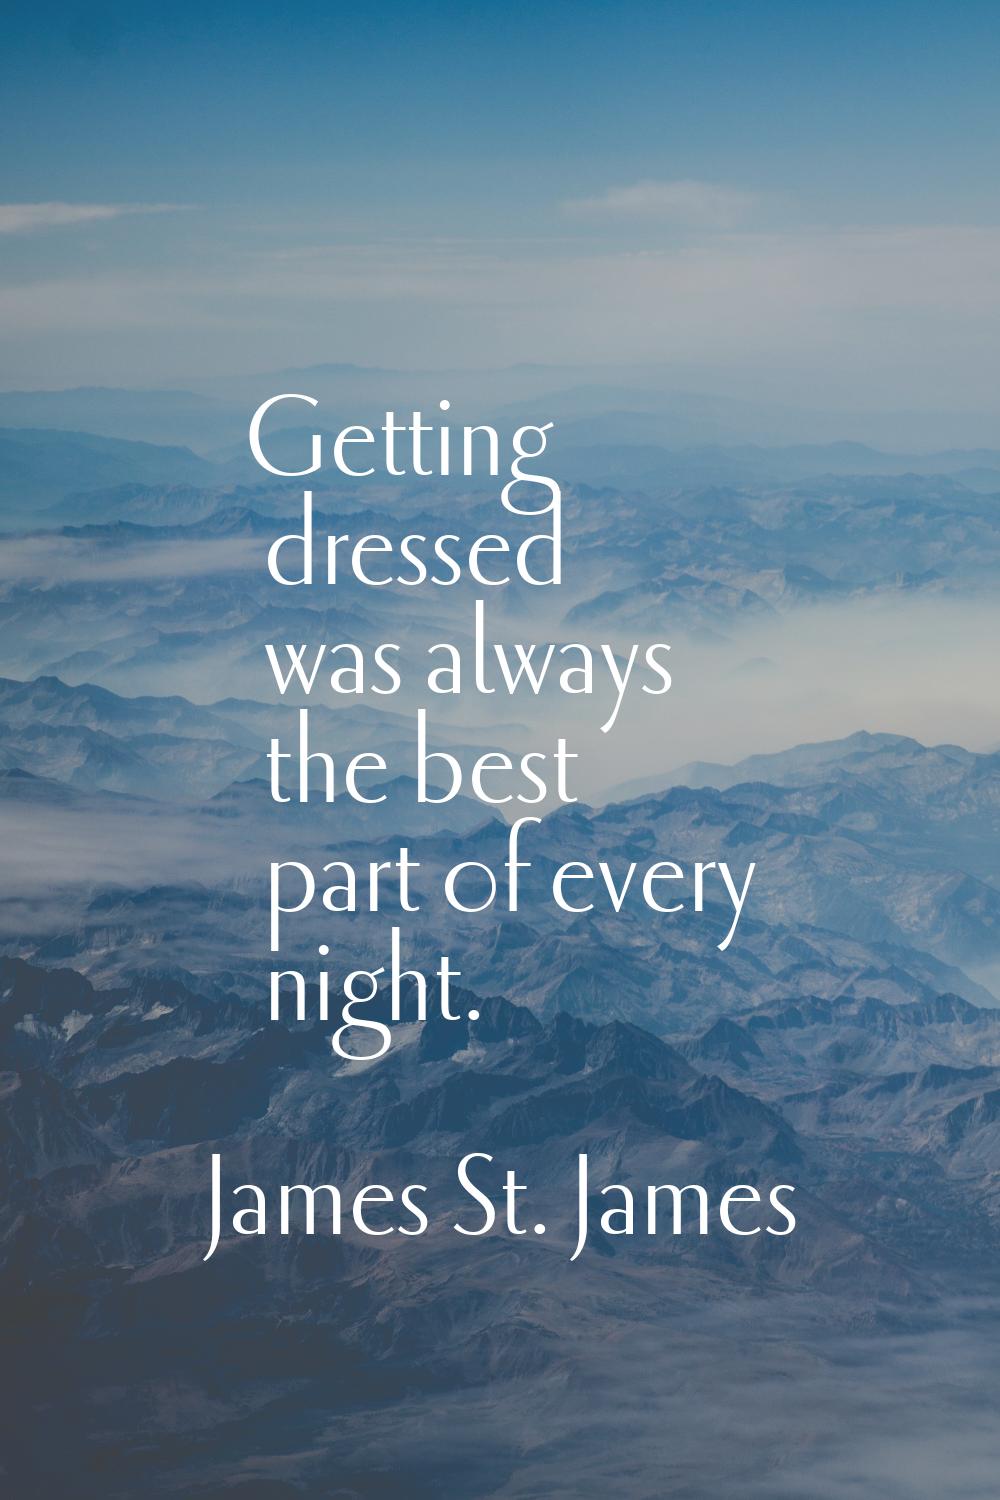 Getting dressed was always the best part of every night.